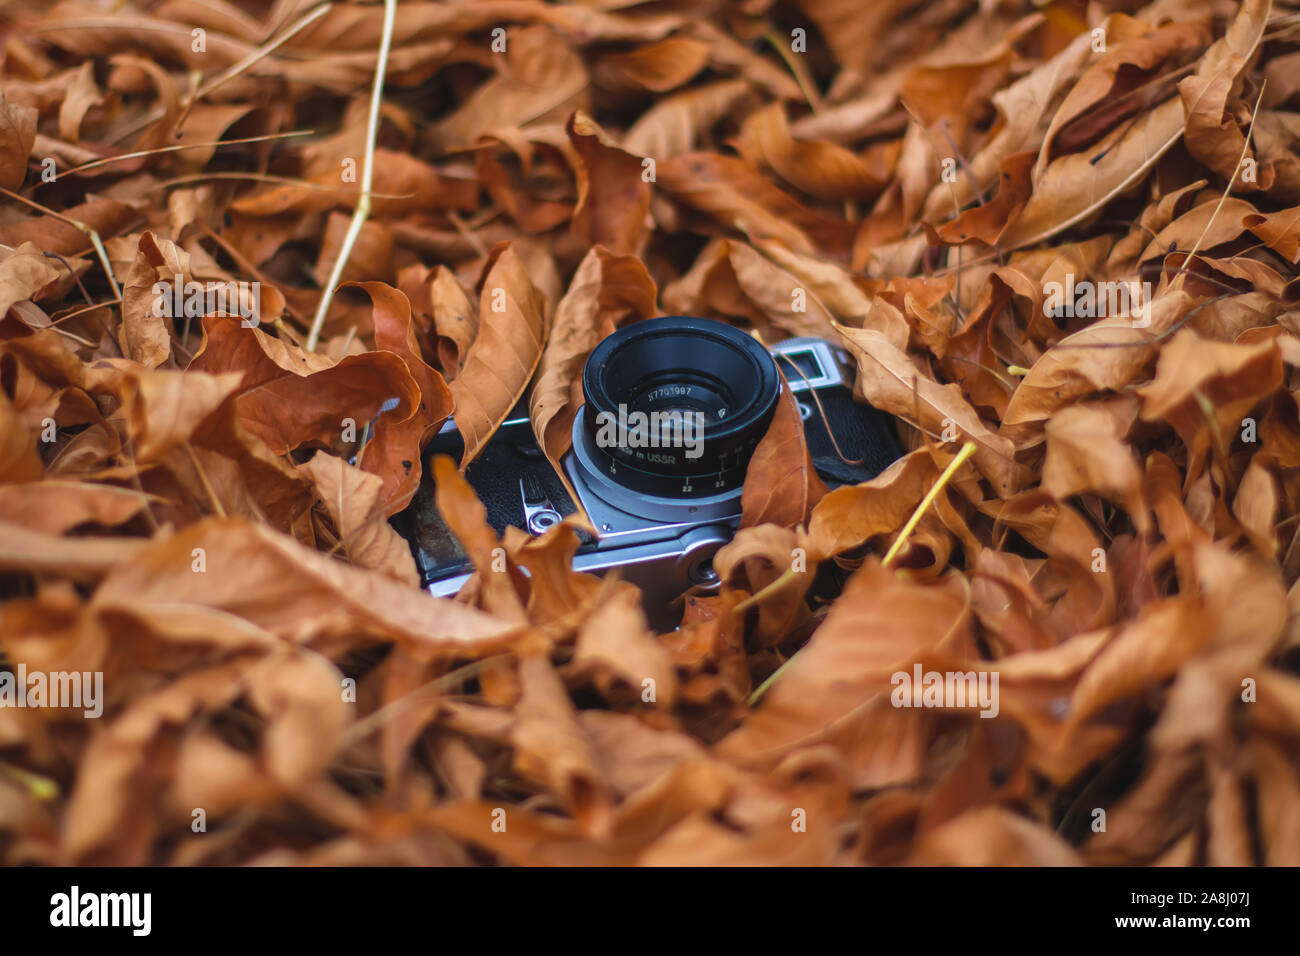 Old vintage photo camera in a pile of orange leaves in autumn. Stock Photo